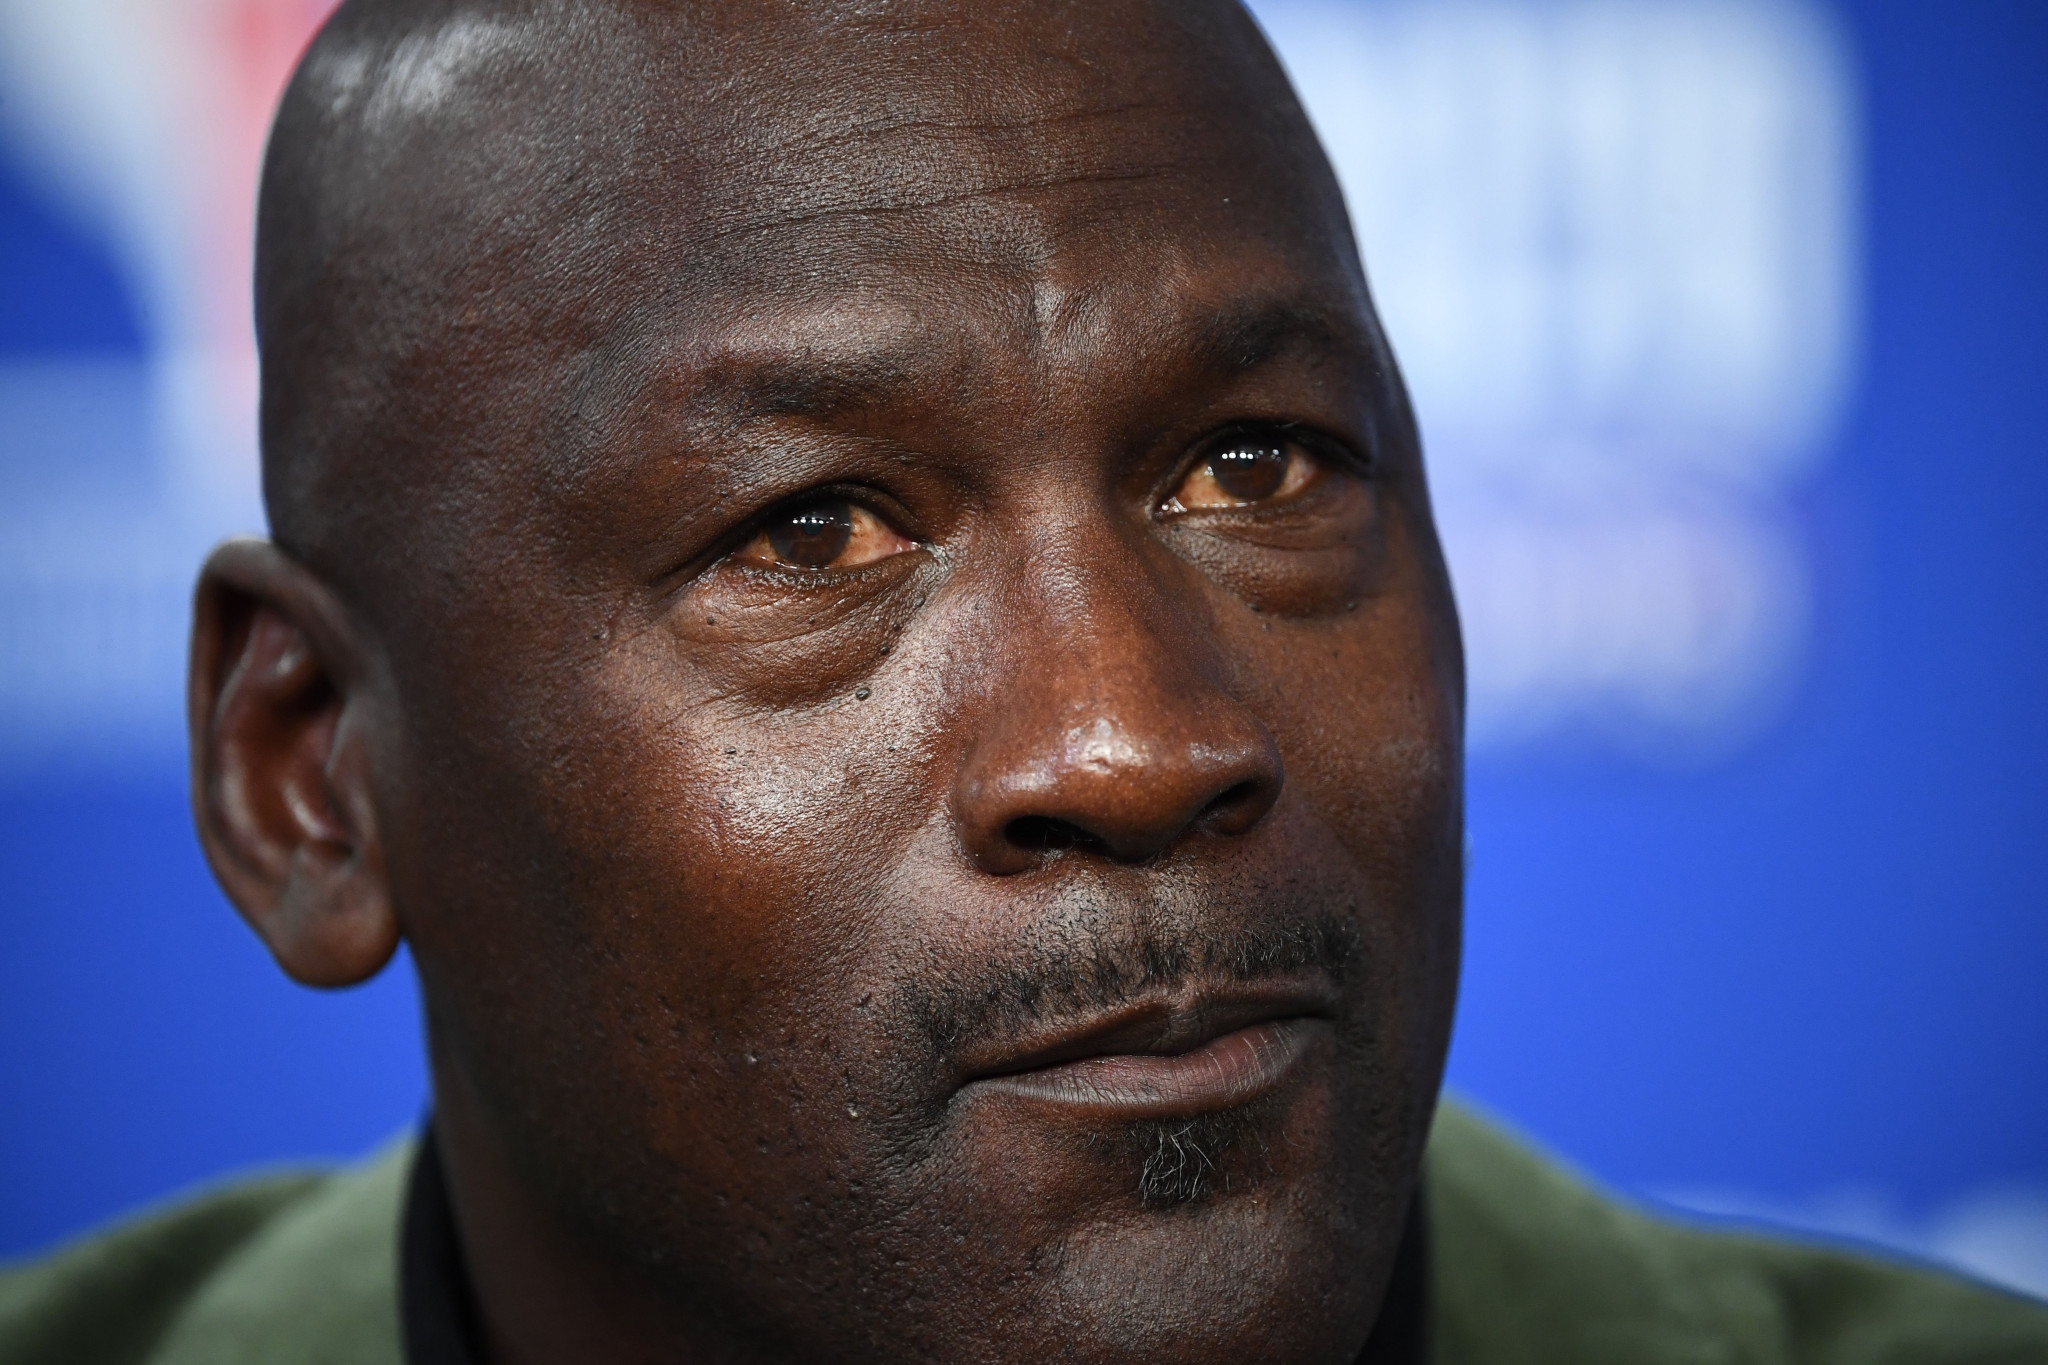 Double Olympic basketball champion Jordan donates $100 million to groups fighting for racial equality